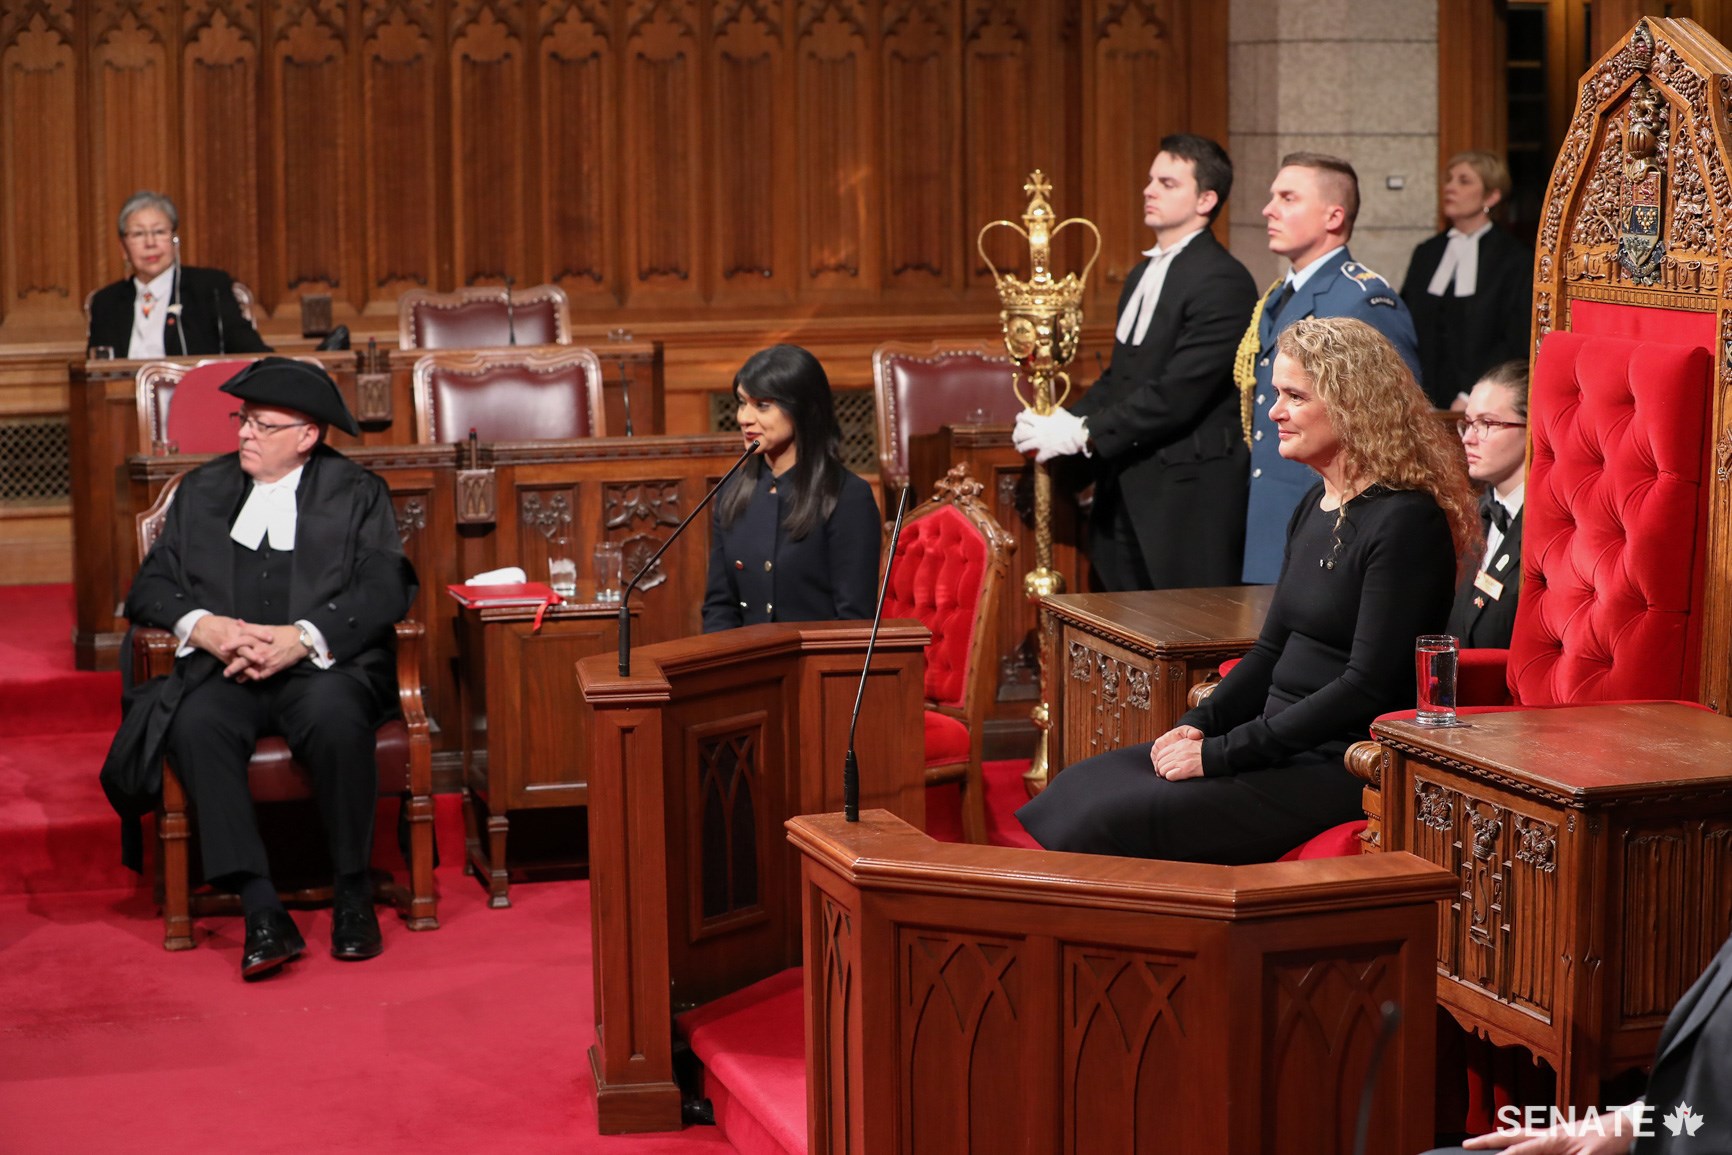 Governor General Julie Payette takes her seat on the Speaker’s dais to grant Royal Assent. It is the last time the Royal Assent ceremony will be marked in Centre Block for at least a decade.